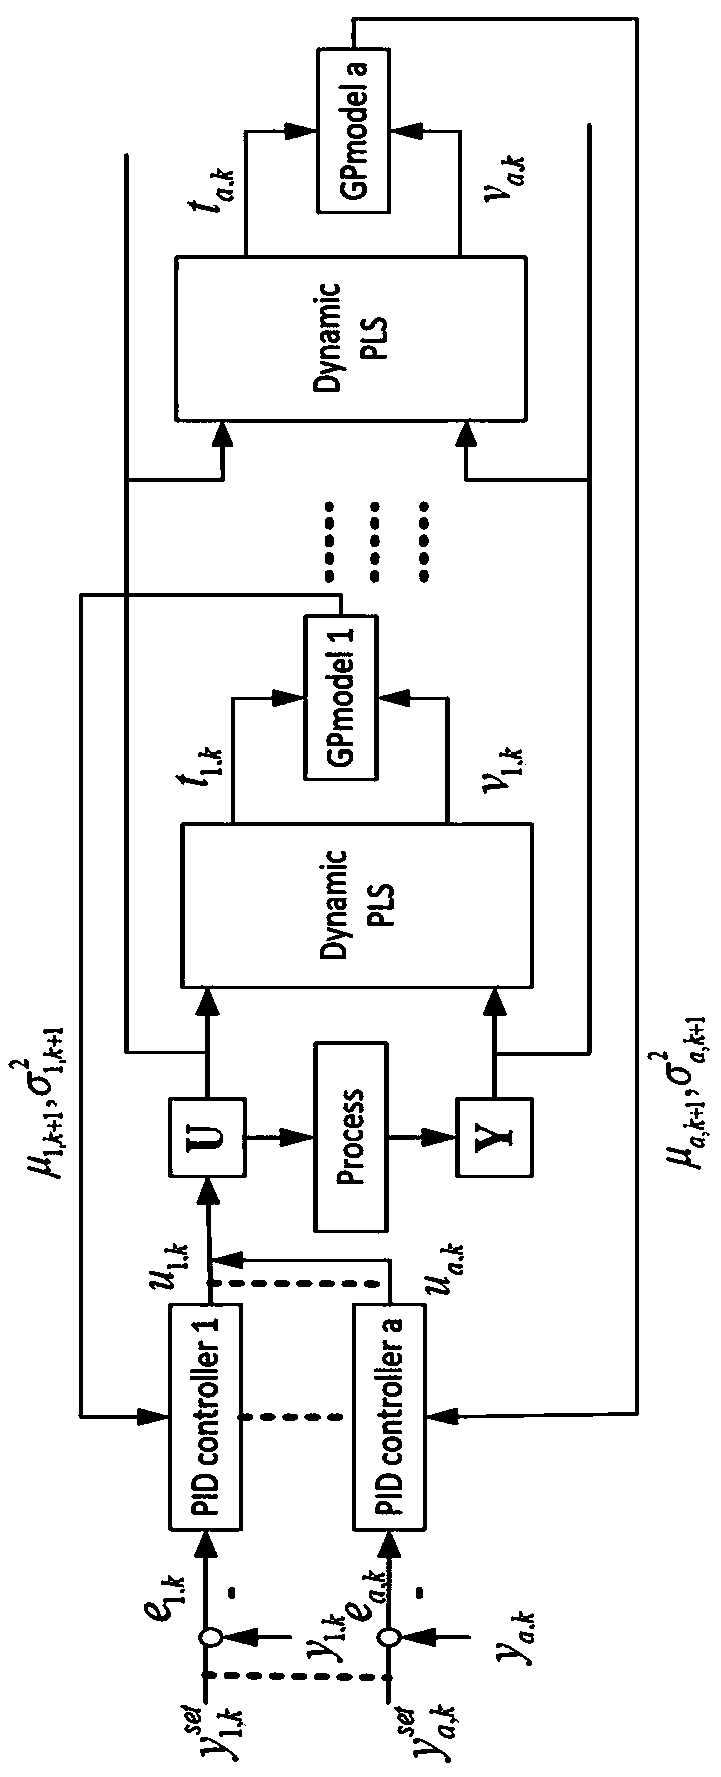 Control strategy for achieving multivariable PID in PLS frame on basis of Gaussian process model